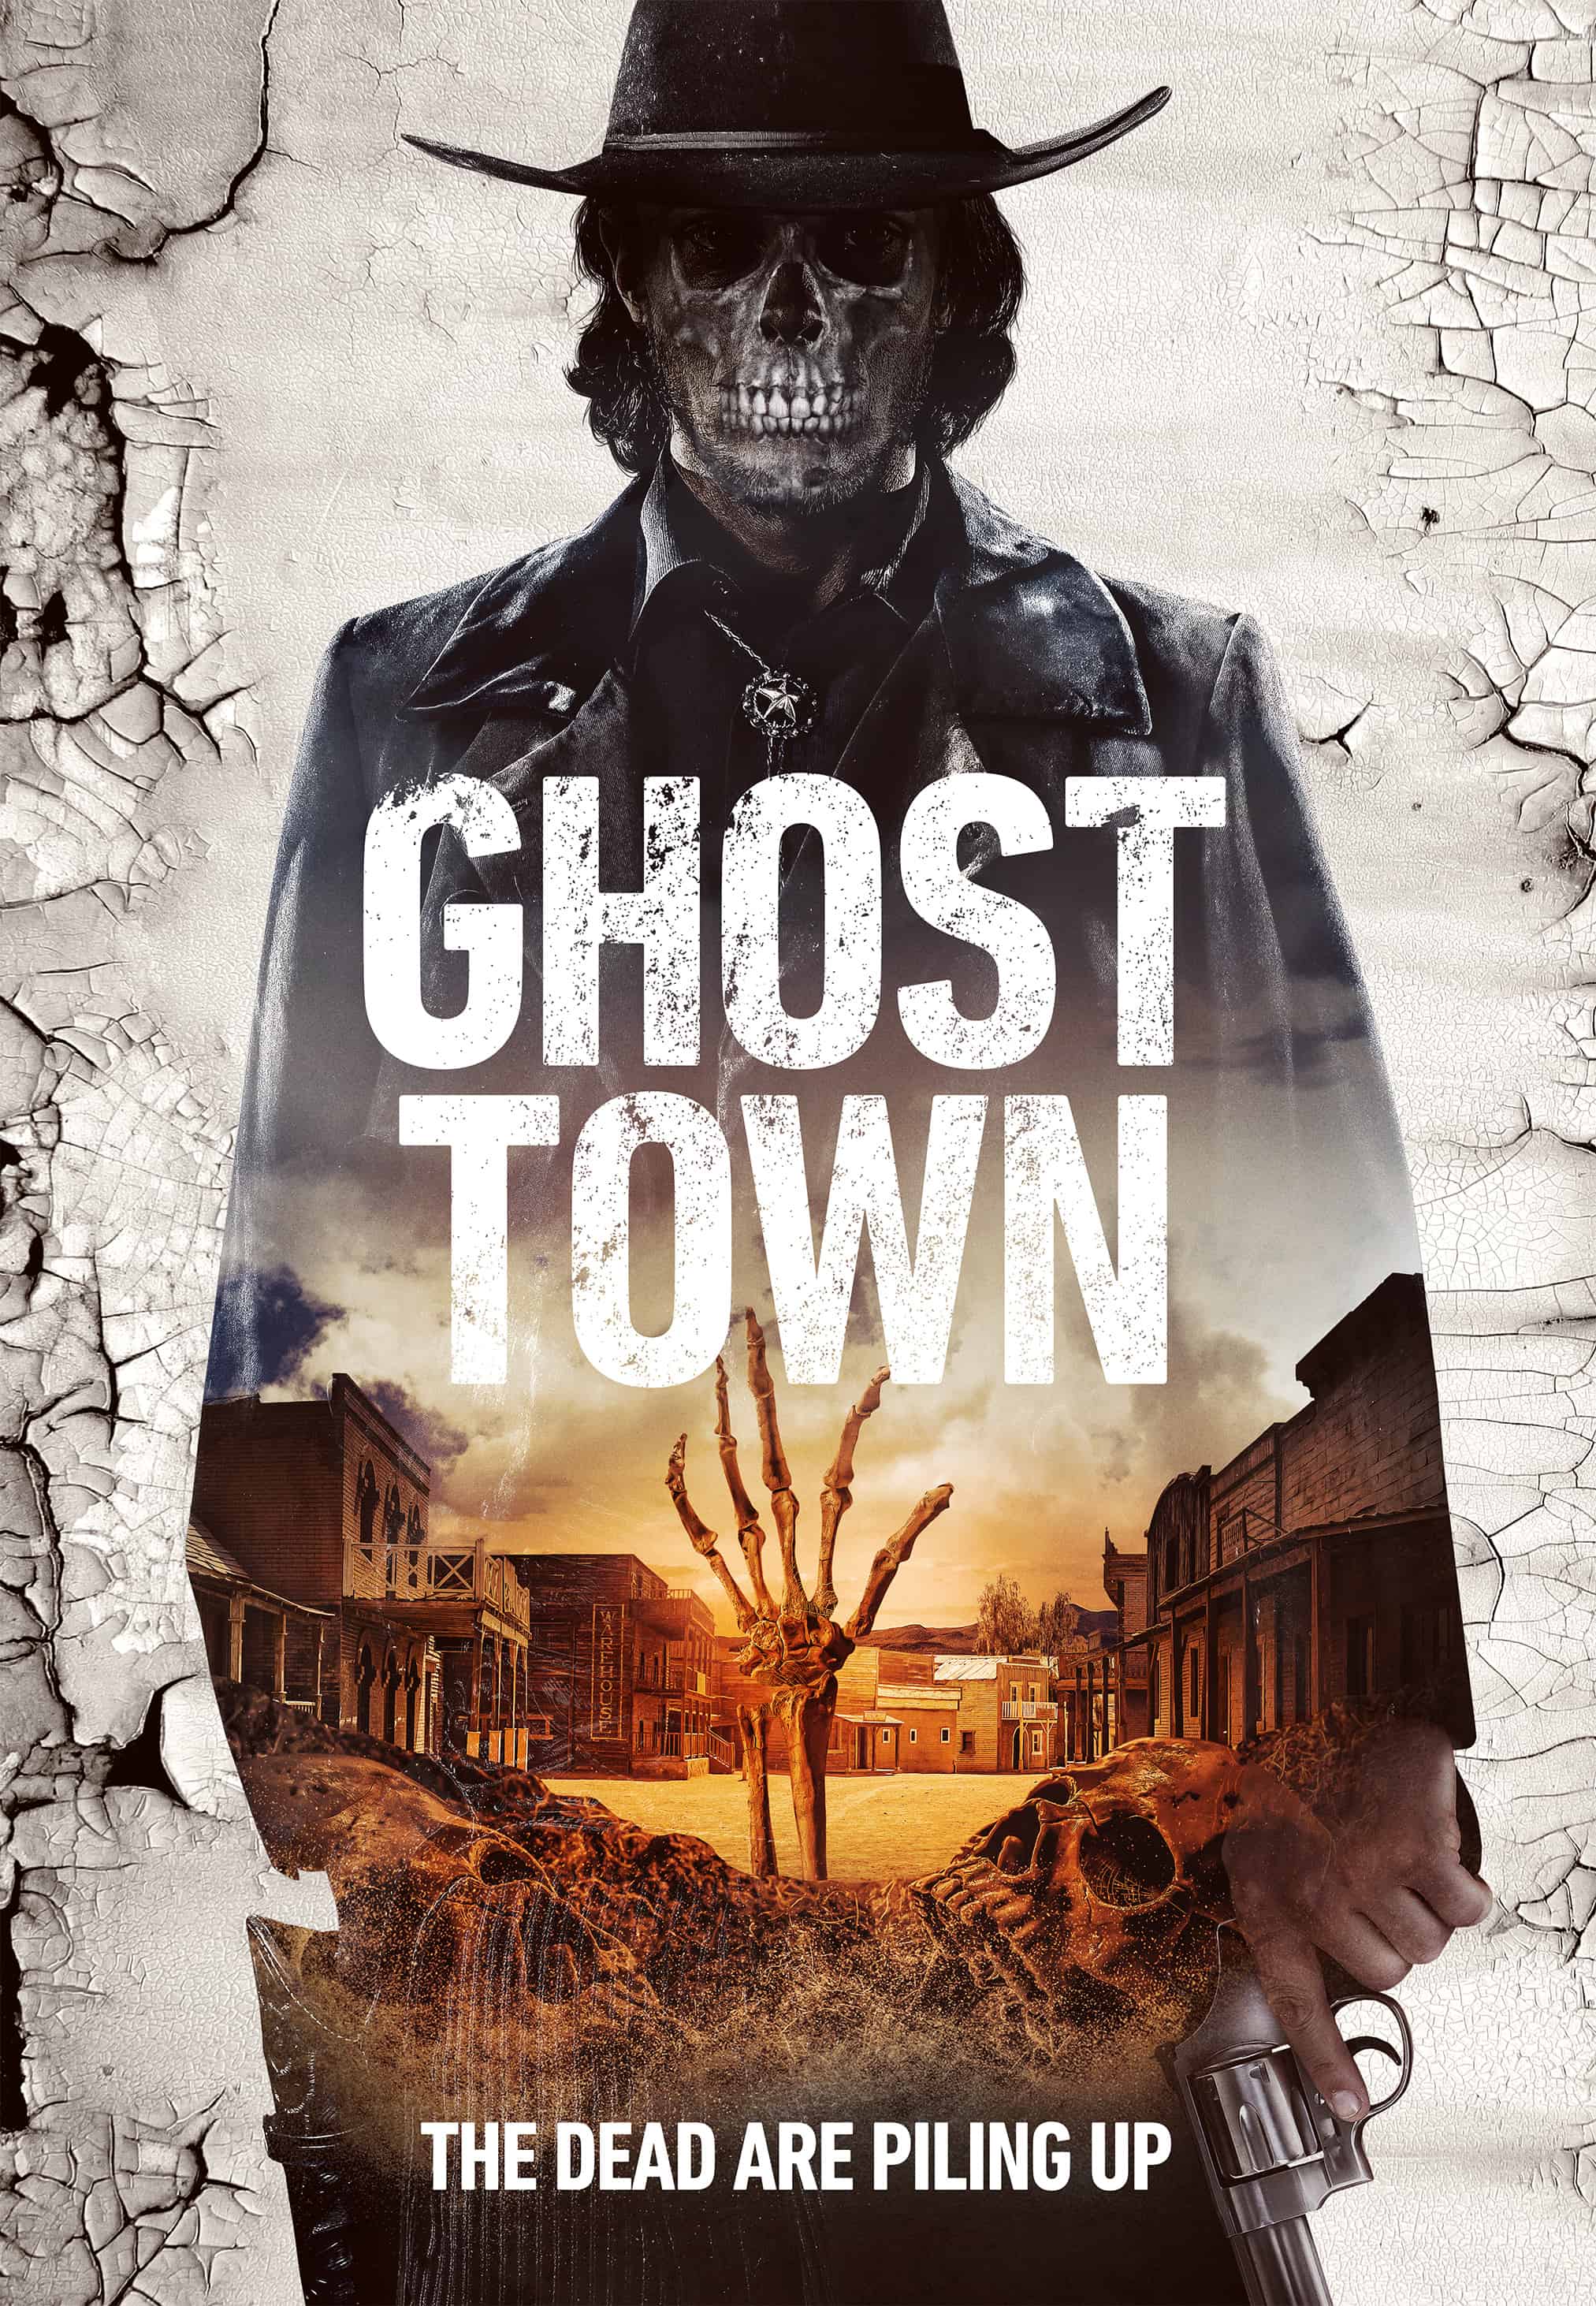 Ghost Town offers up a poster and trailer arrives March 7th 21